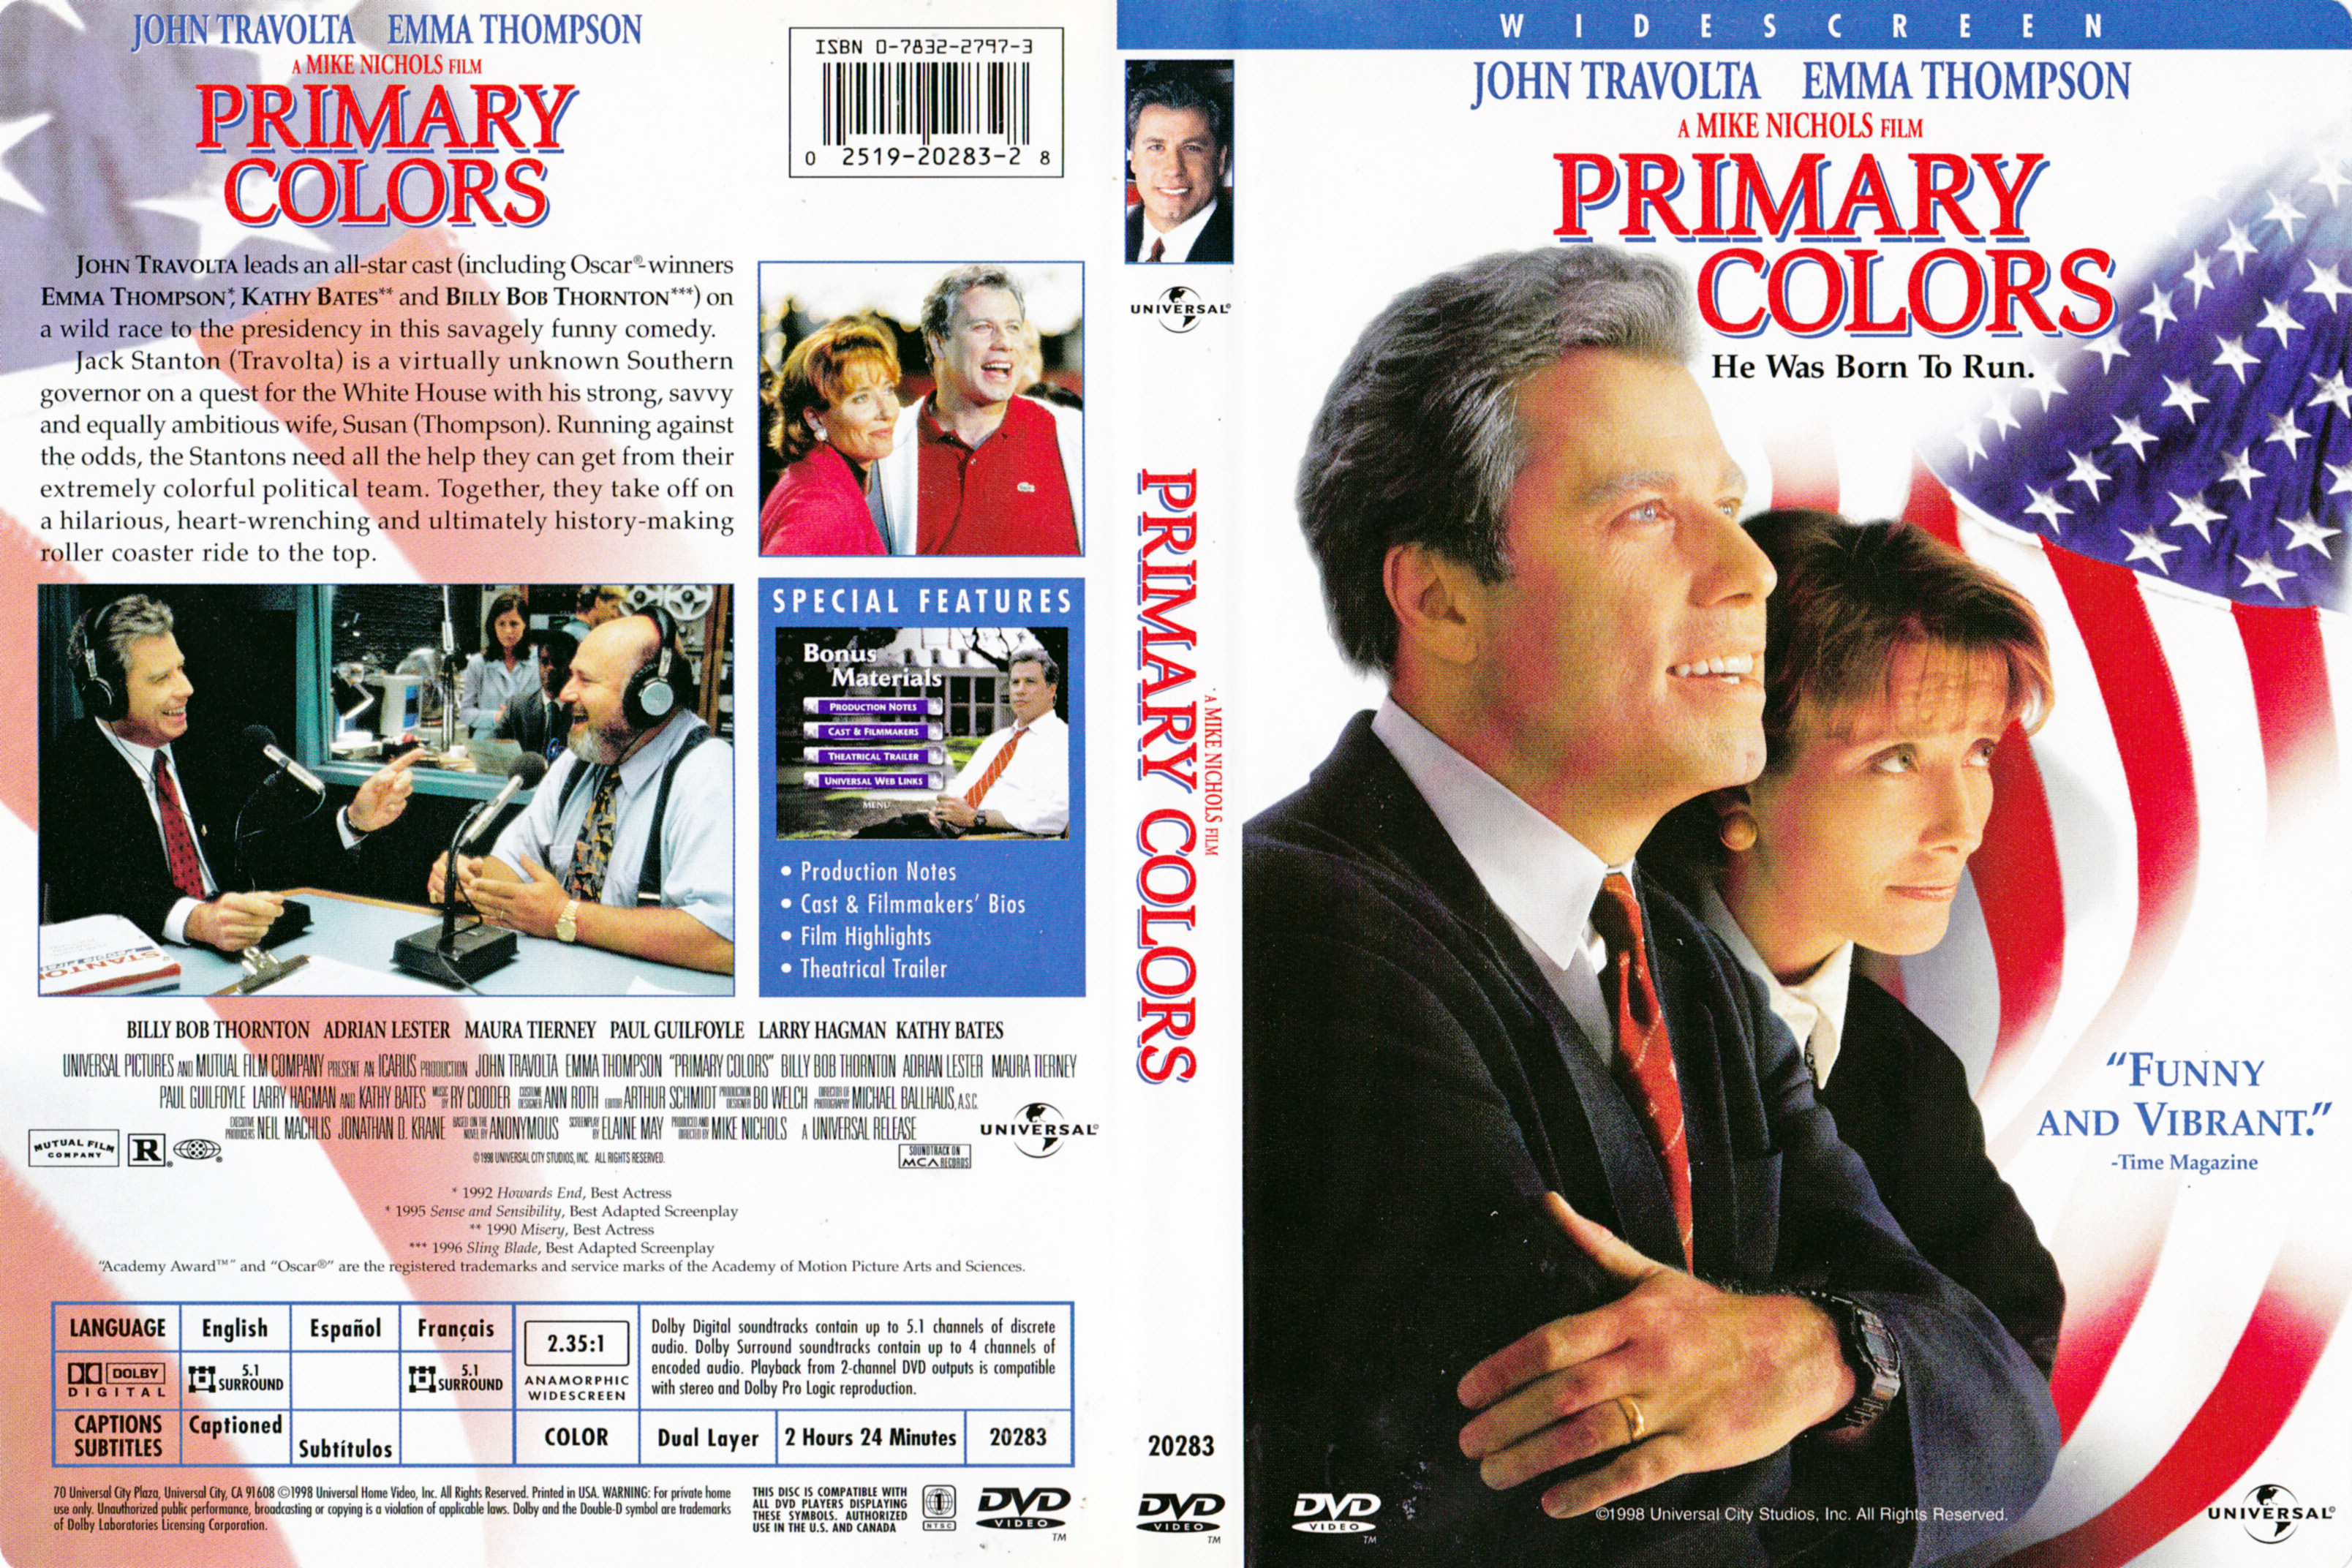 Jaquette DVD Primary colors (Canadienne)